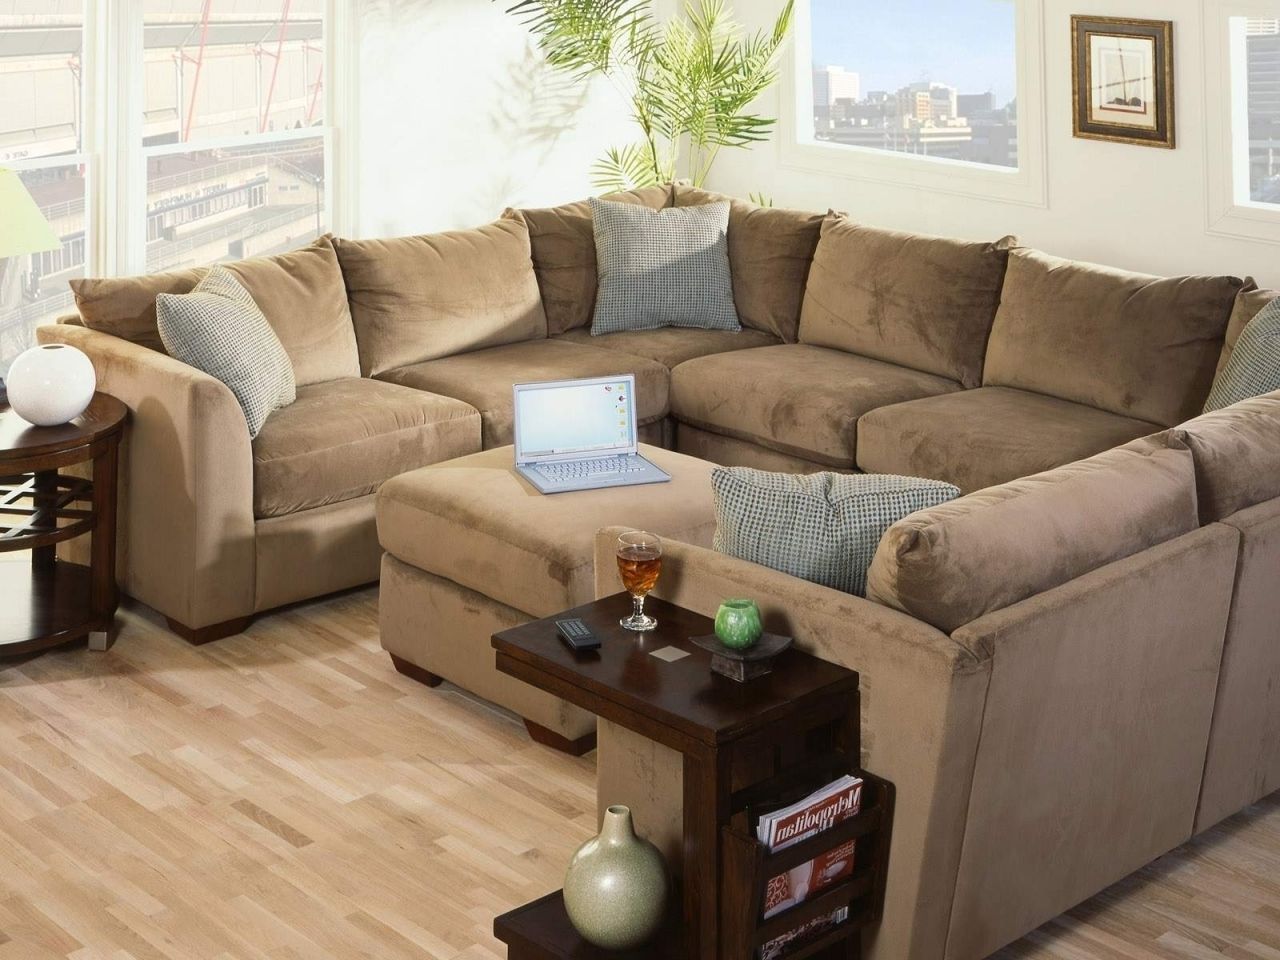 Amazing Sectional Couches Big Lots 77 On Contemporary Sofa With Most Current Sectional Sofas At Big Lots (View 3 of 15)